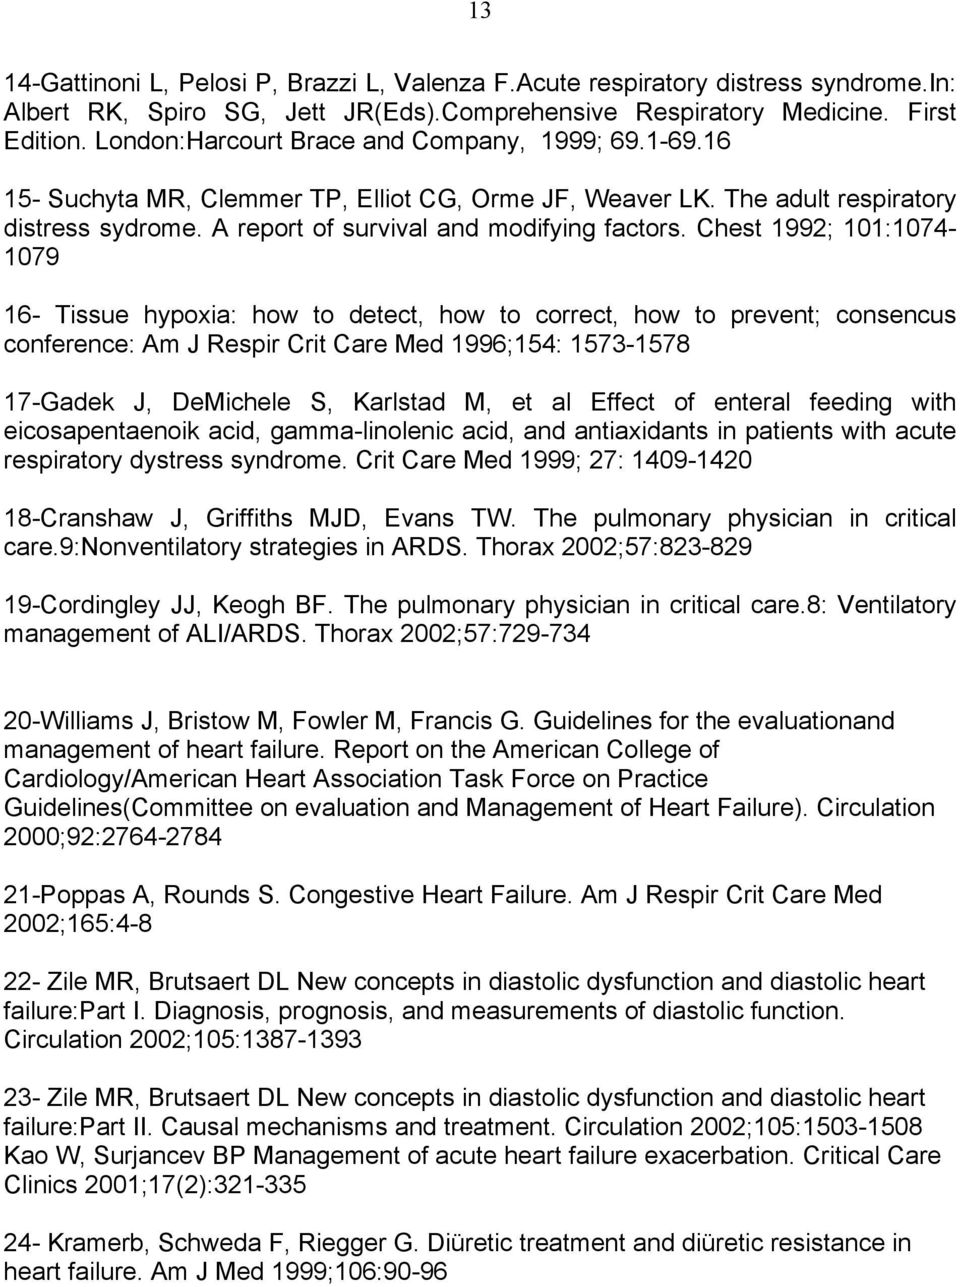 Chest 1992; 101:1074-1079 16- Tissue hypoxia: how to detect, how to correct, how to prevent; consencus conference: Am J Respir Crit Care Med 1996;154: 1573-1578 17-Gadek J, DeMichele S, Karlstad M,